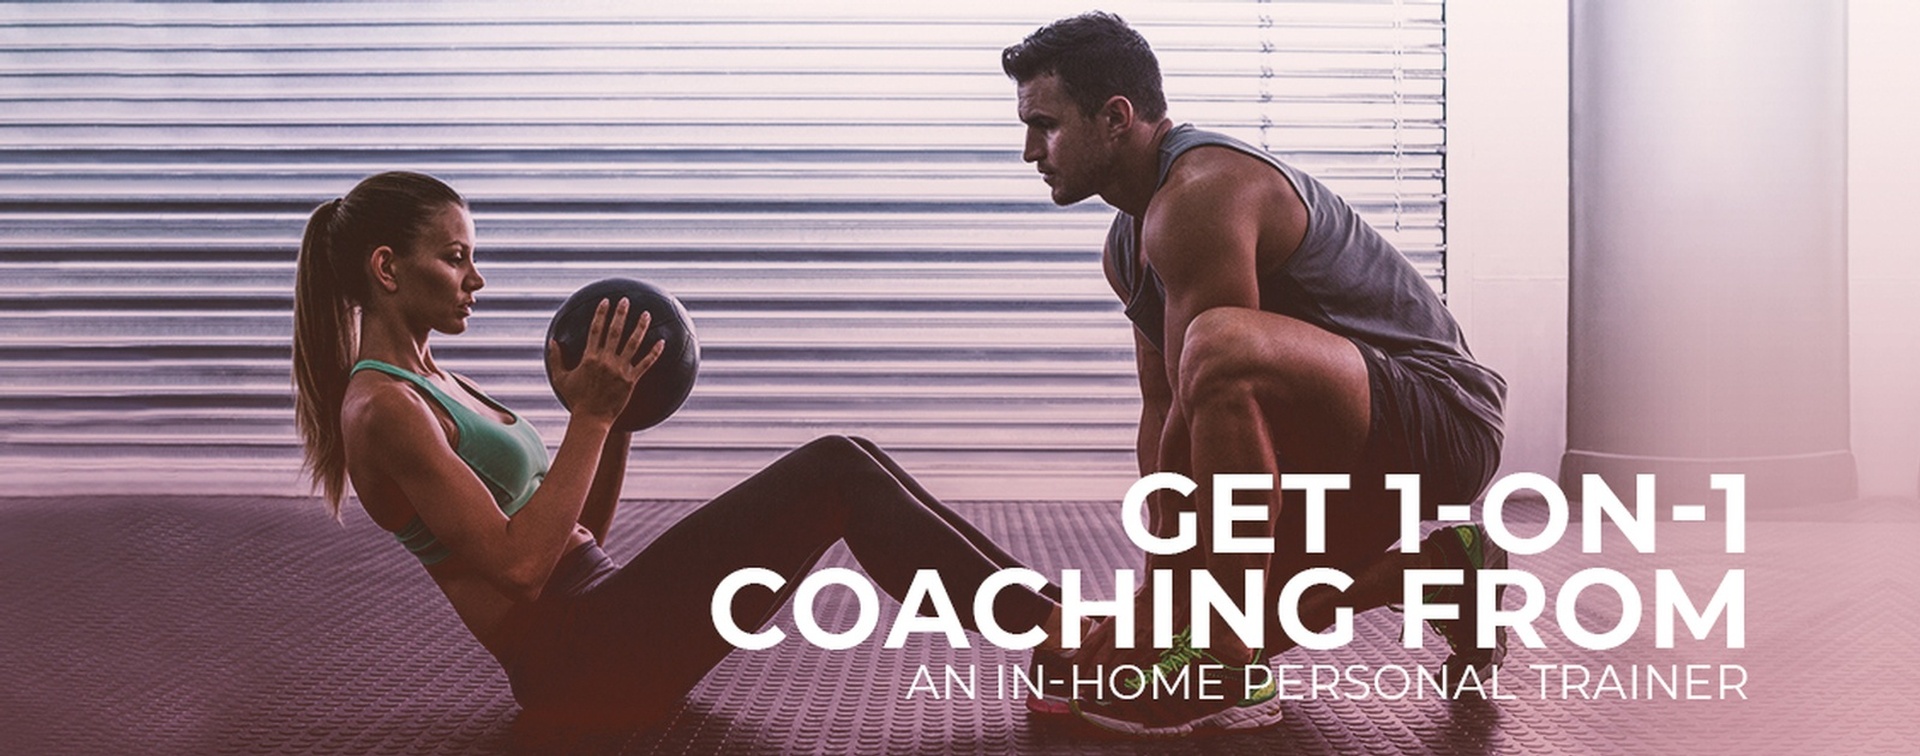 IN-HOME PERSONAL TRAINING